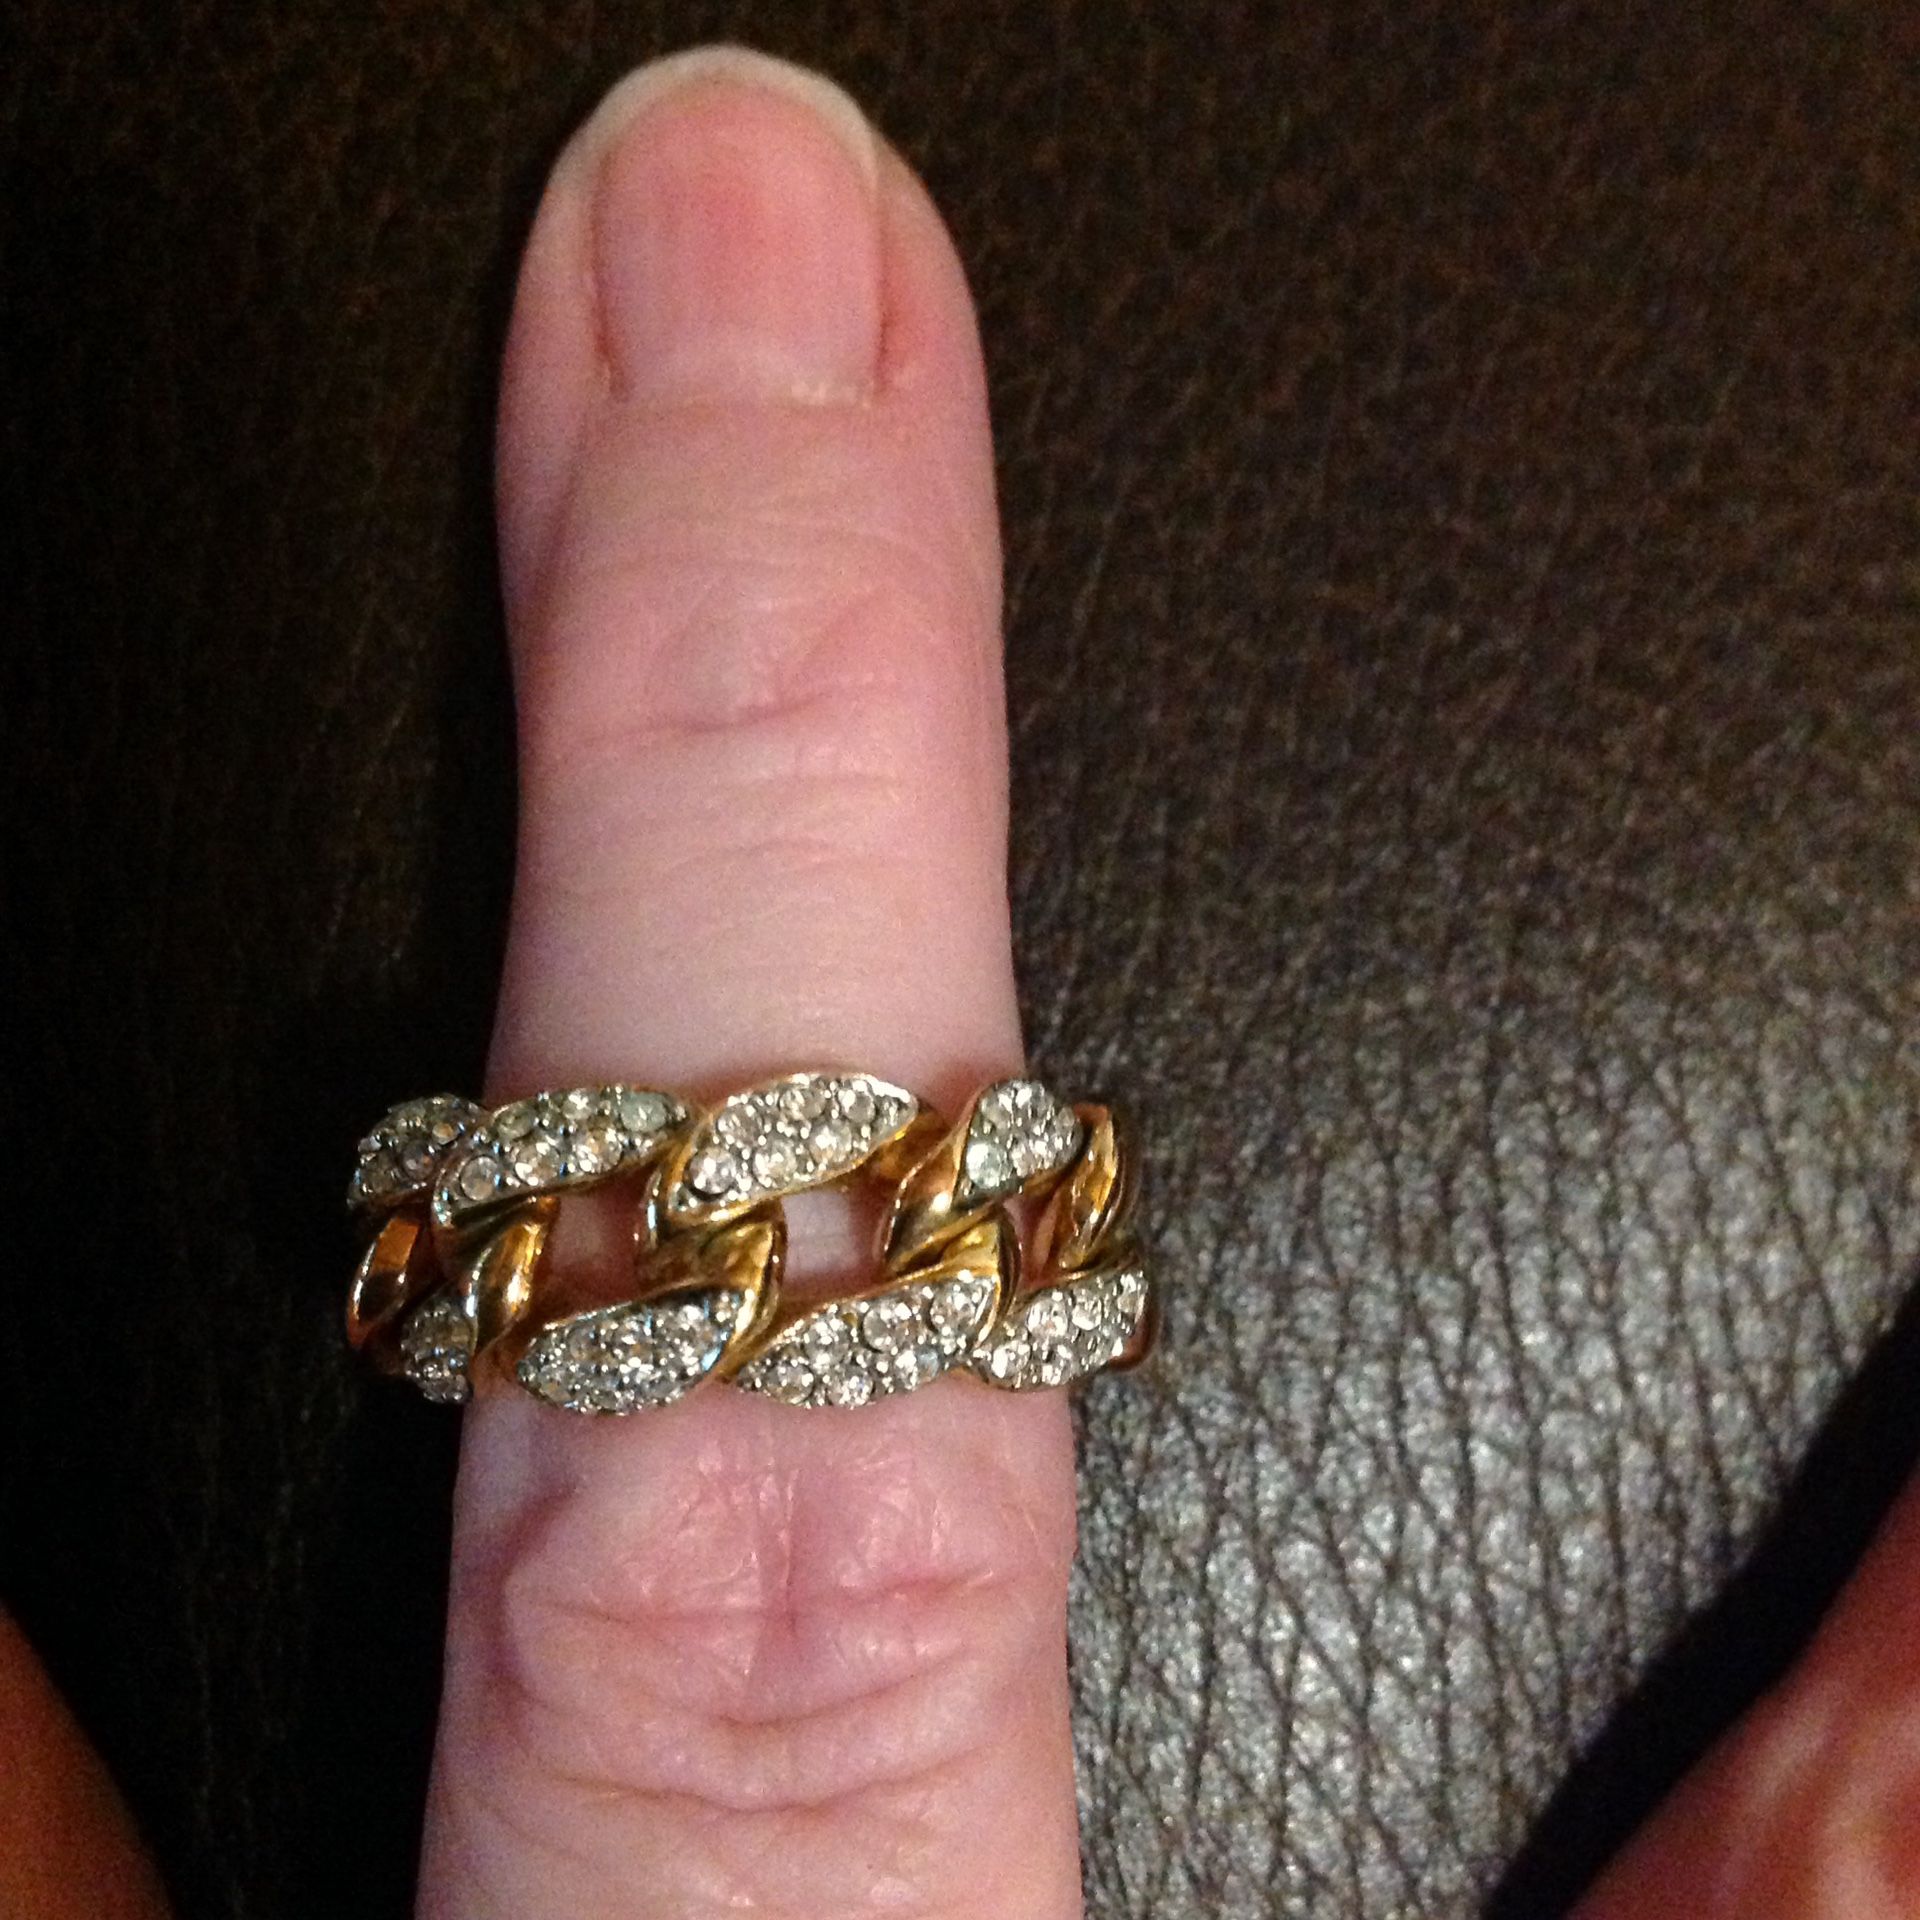 New Pave CZ Chain Ring Band - sparkles like crazy!